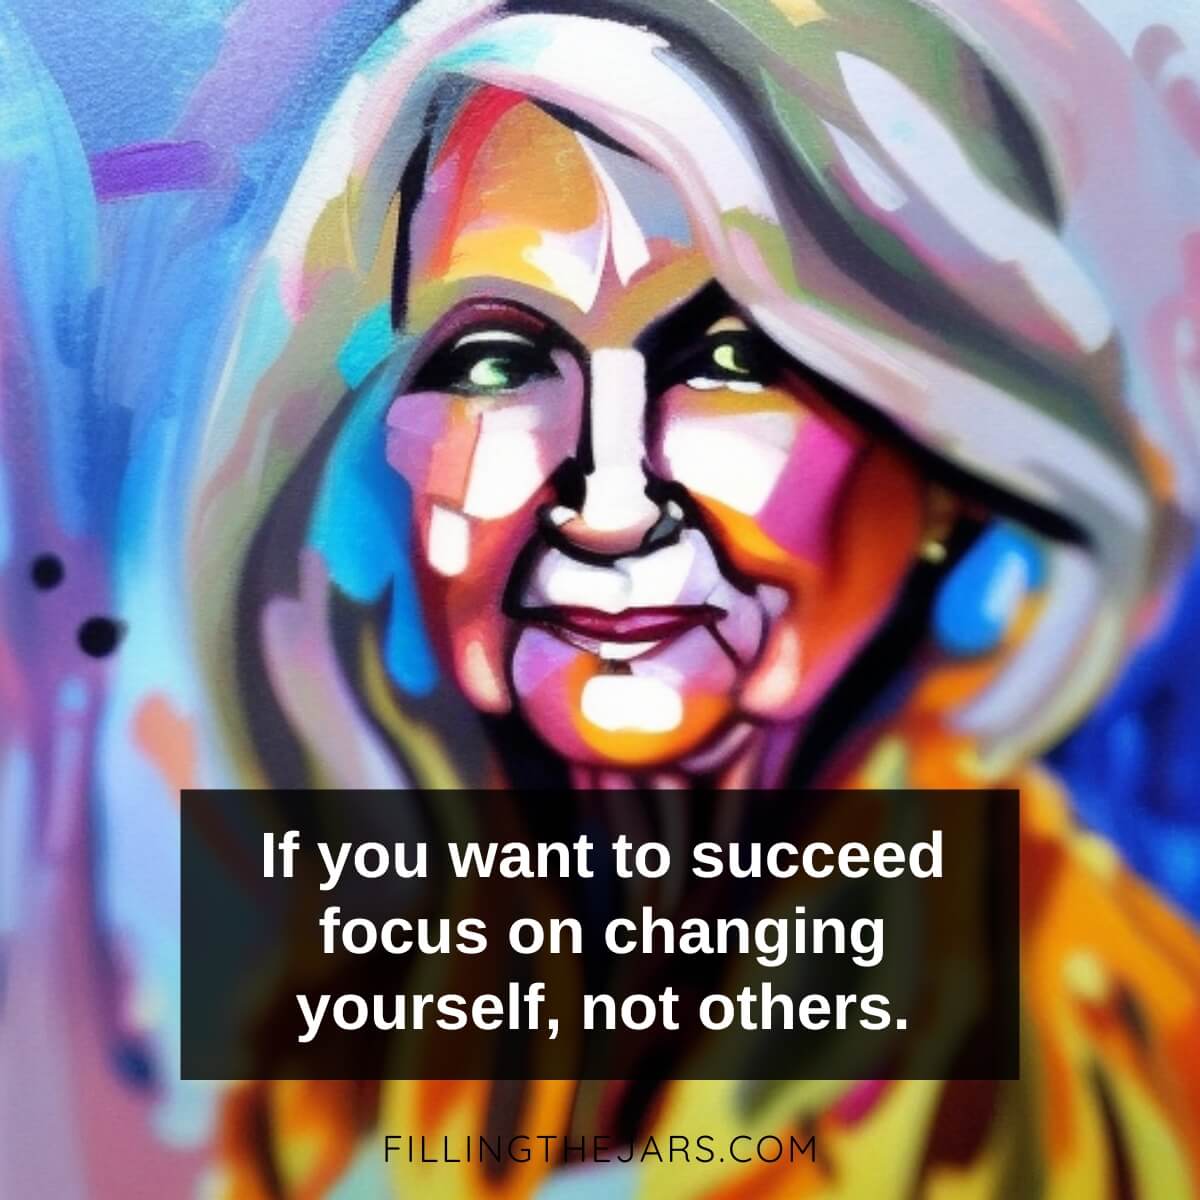 Focus on changing yourself quote in white text on black square over illustration of older woman looking off-camera.